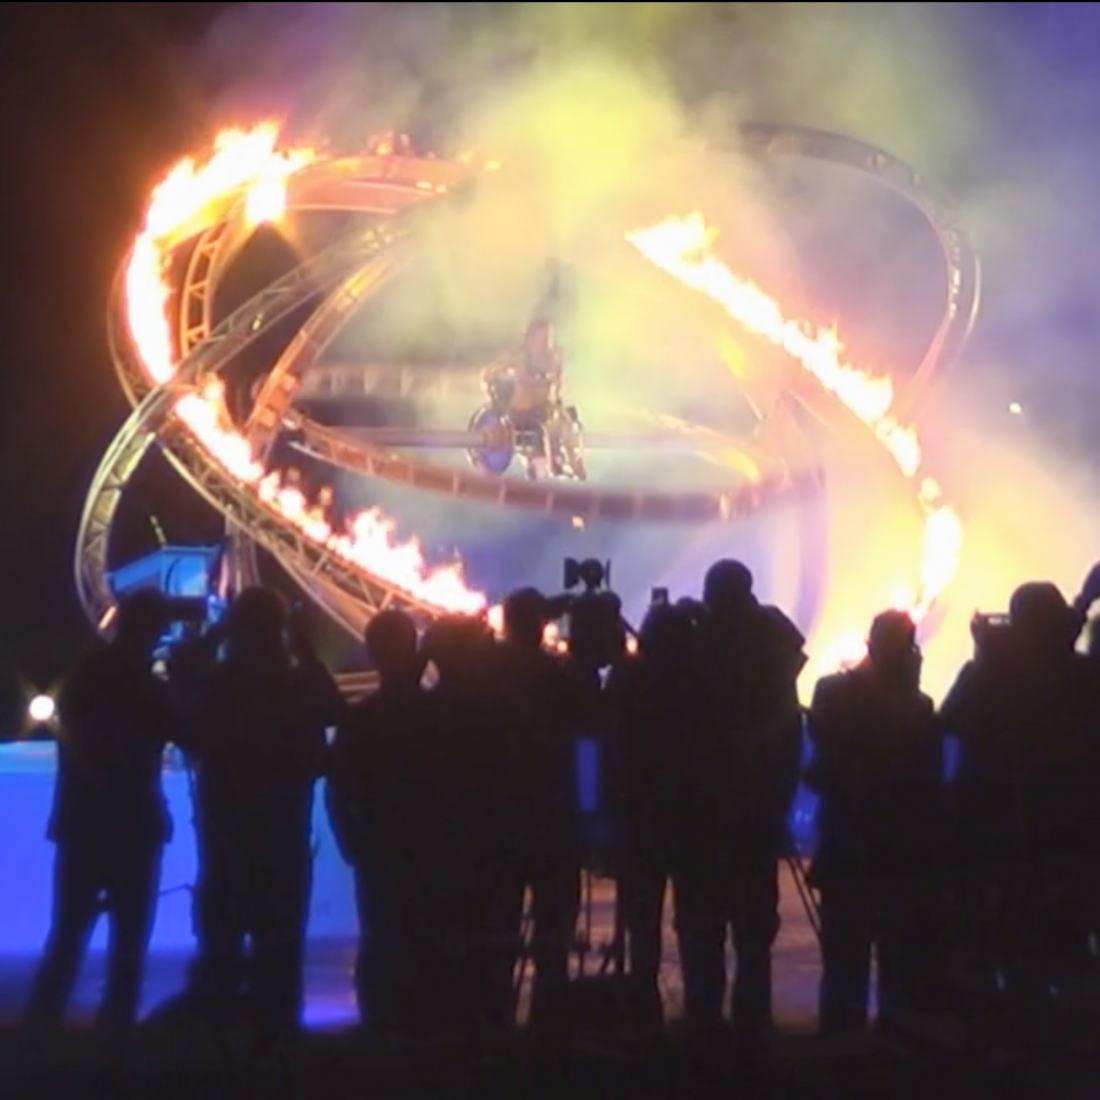 Young female paralympian surrounded by flames and pyrotechnics at the Paralympic torch lighting ceremony